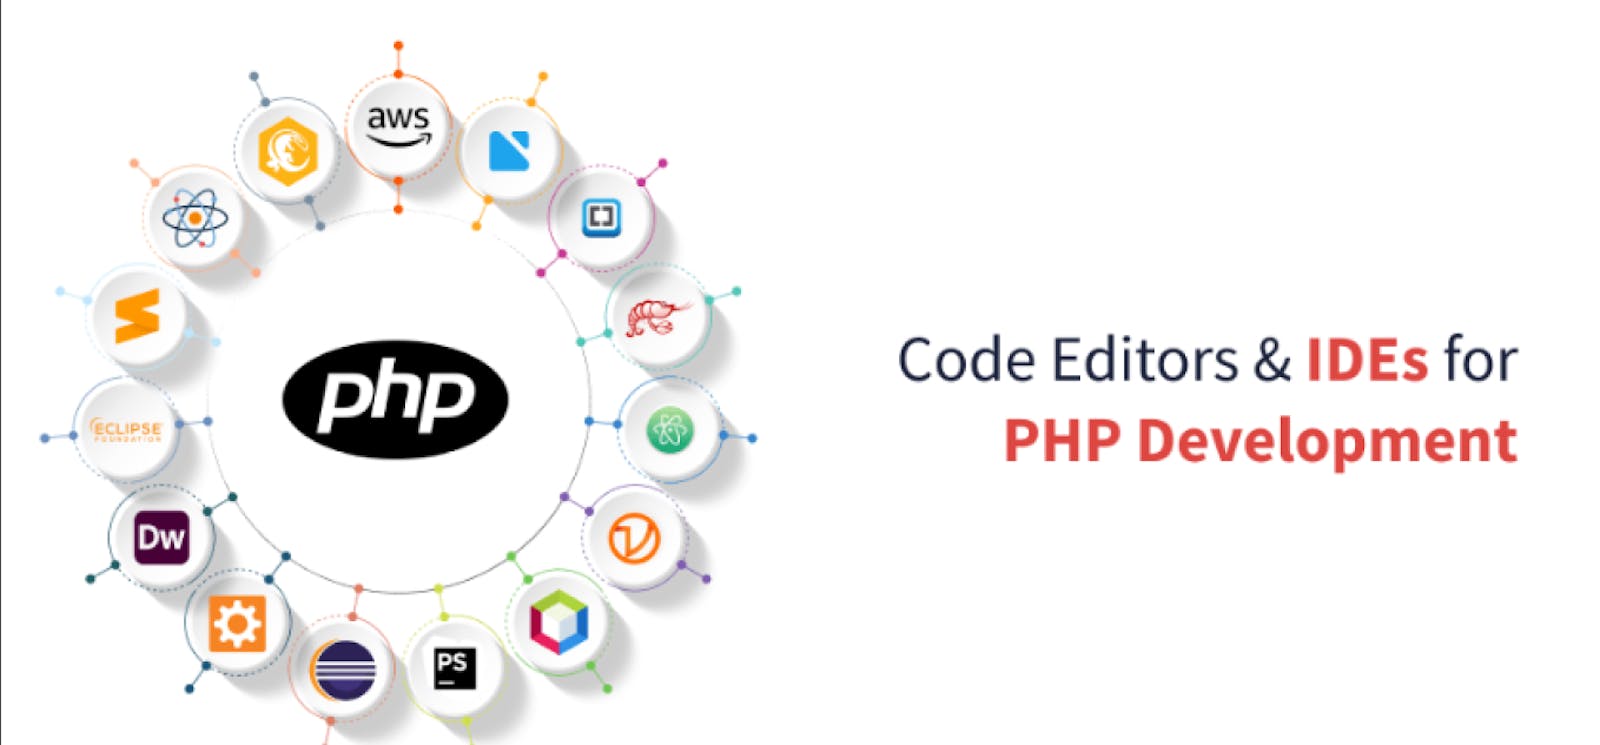 What's the best editor/IDE for PHP?